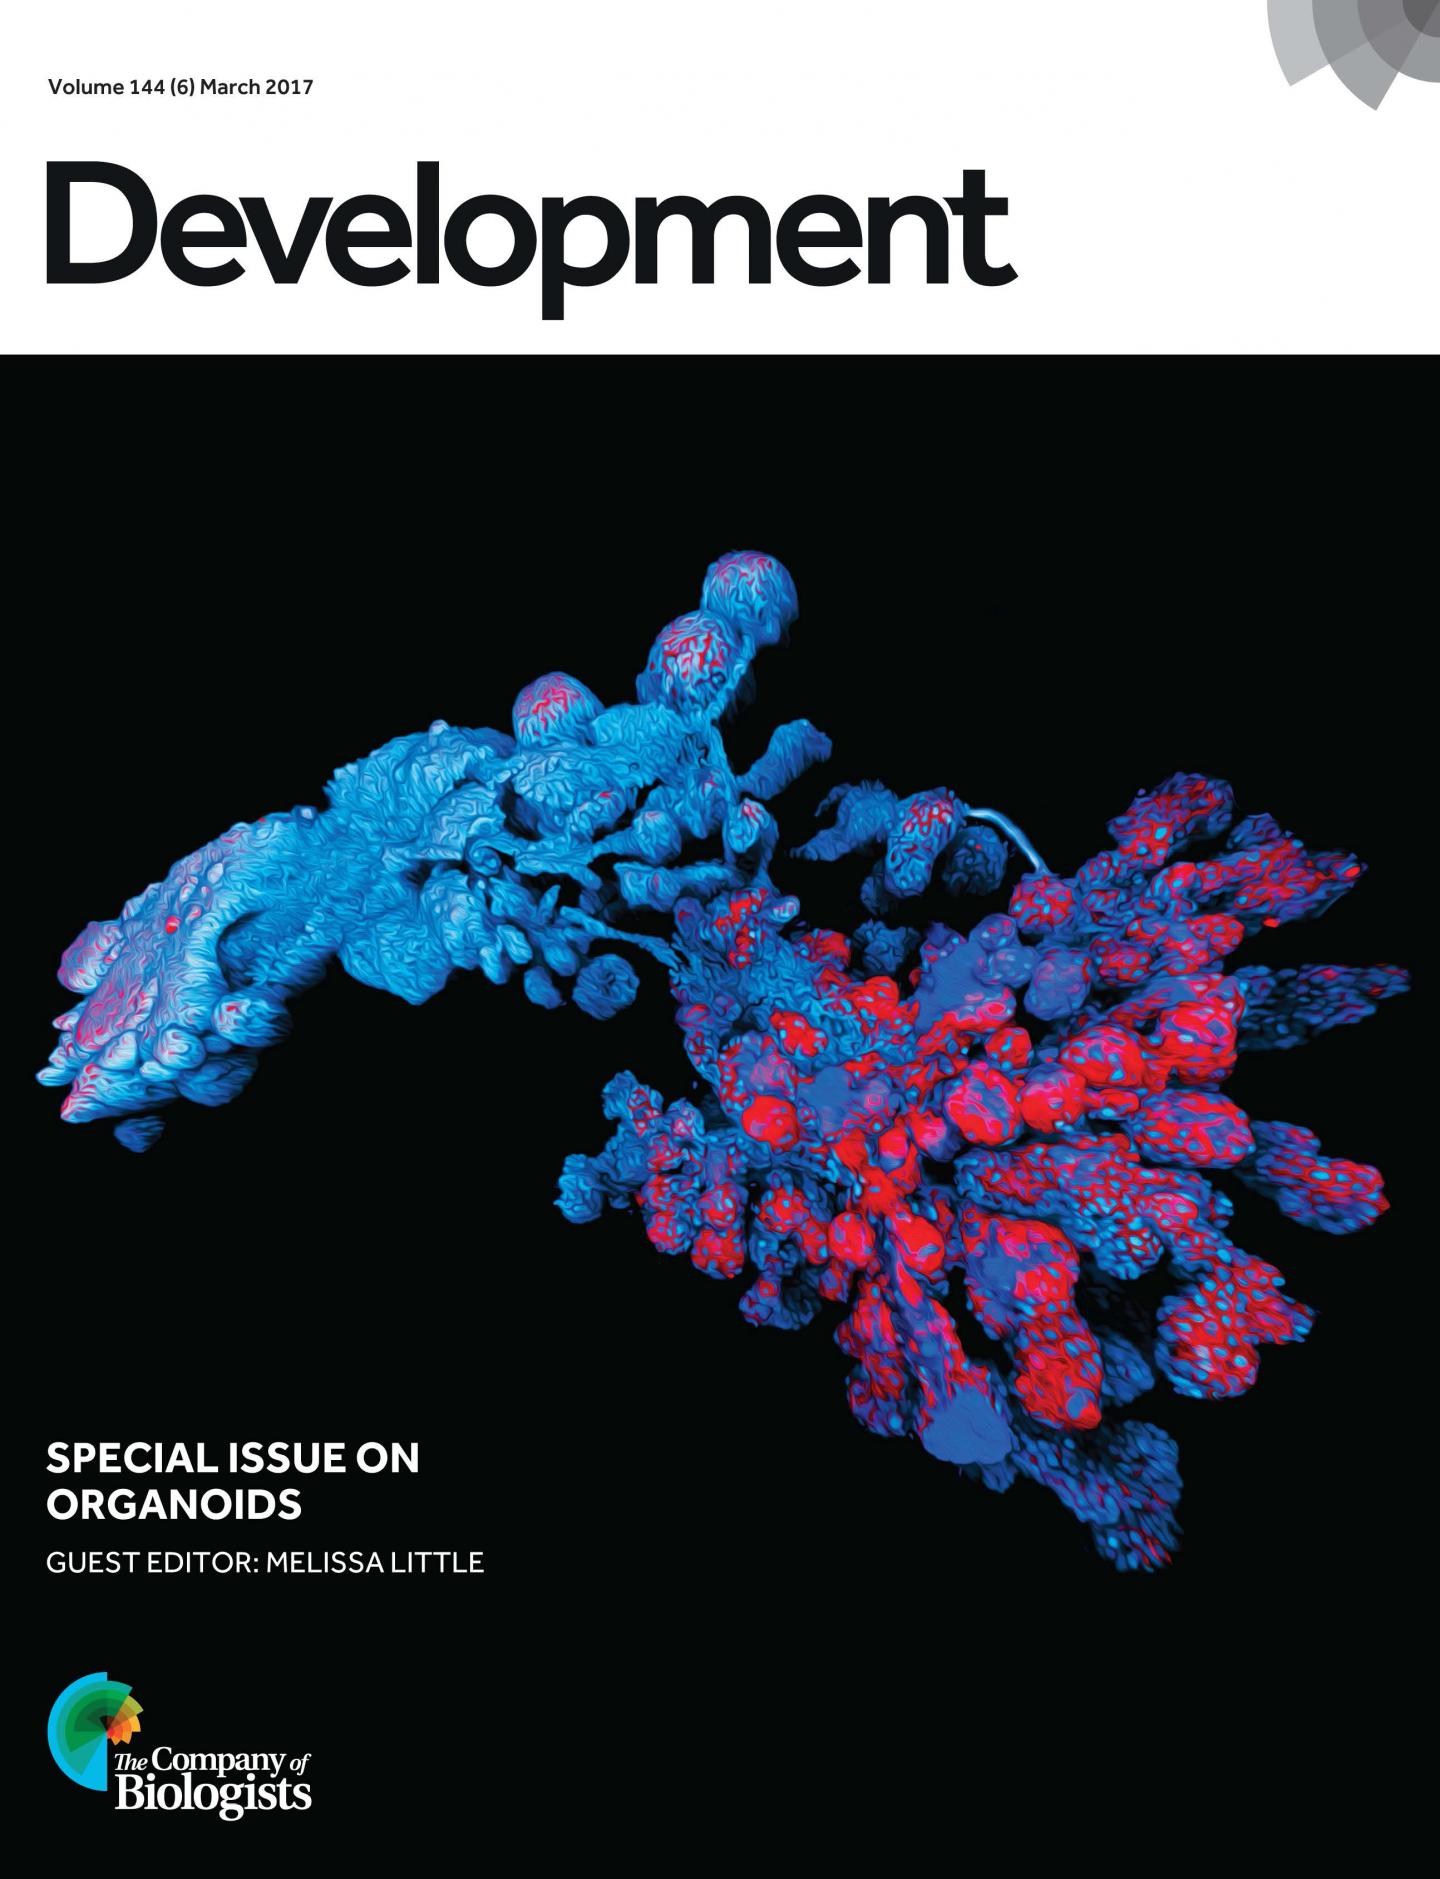 Development Special Issue on Organoids